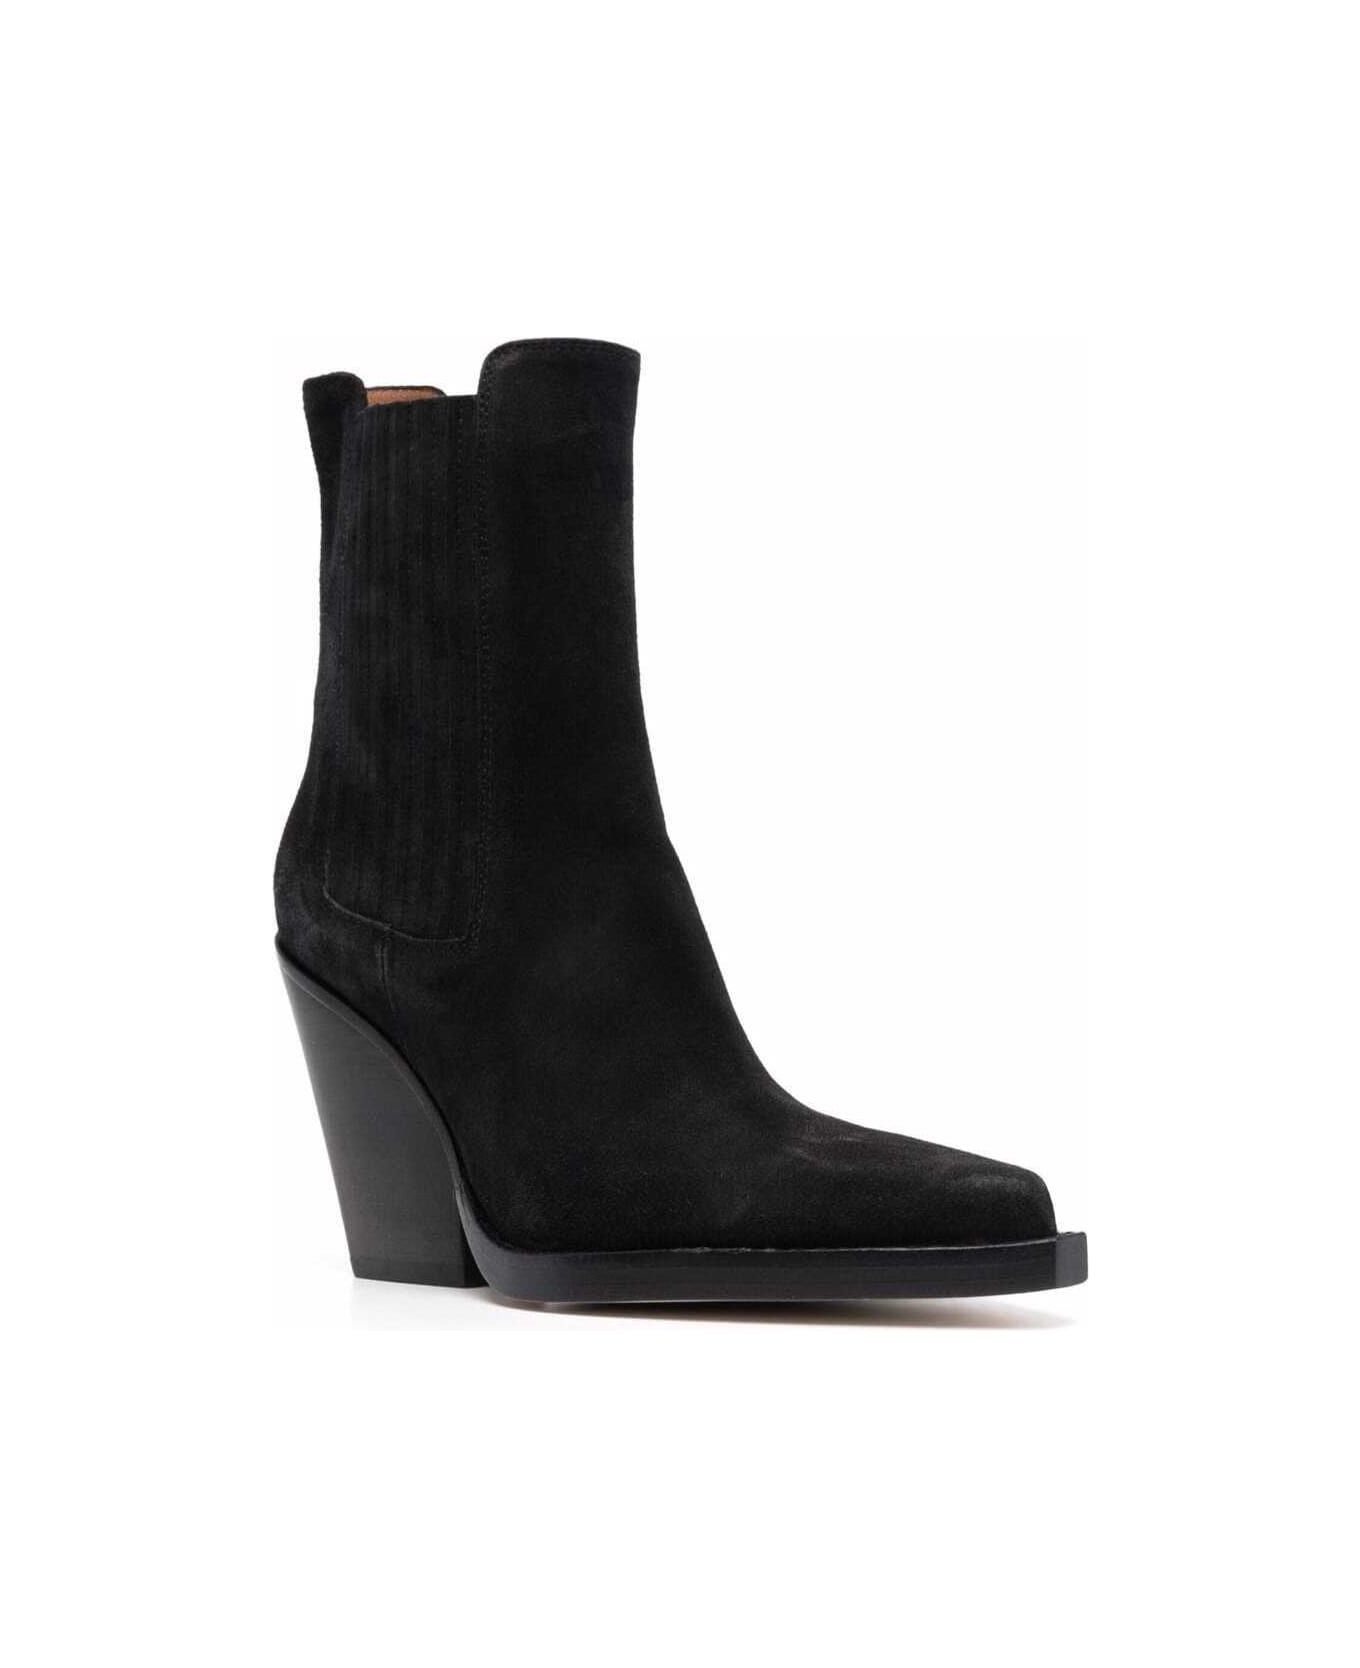 Paris Texas Black Dallas Ankle Boot In Calf Suede With Logo Detail On The Insole And 10.5cm Wide Heel - Black